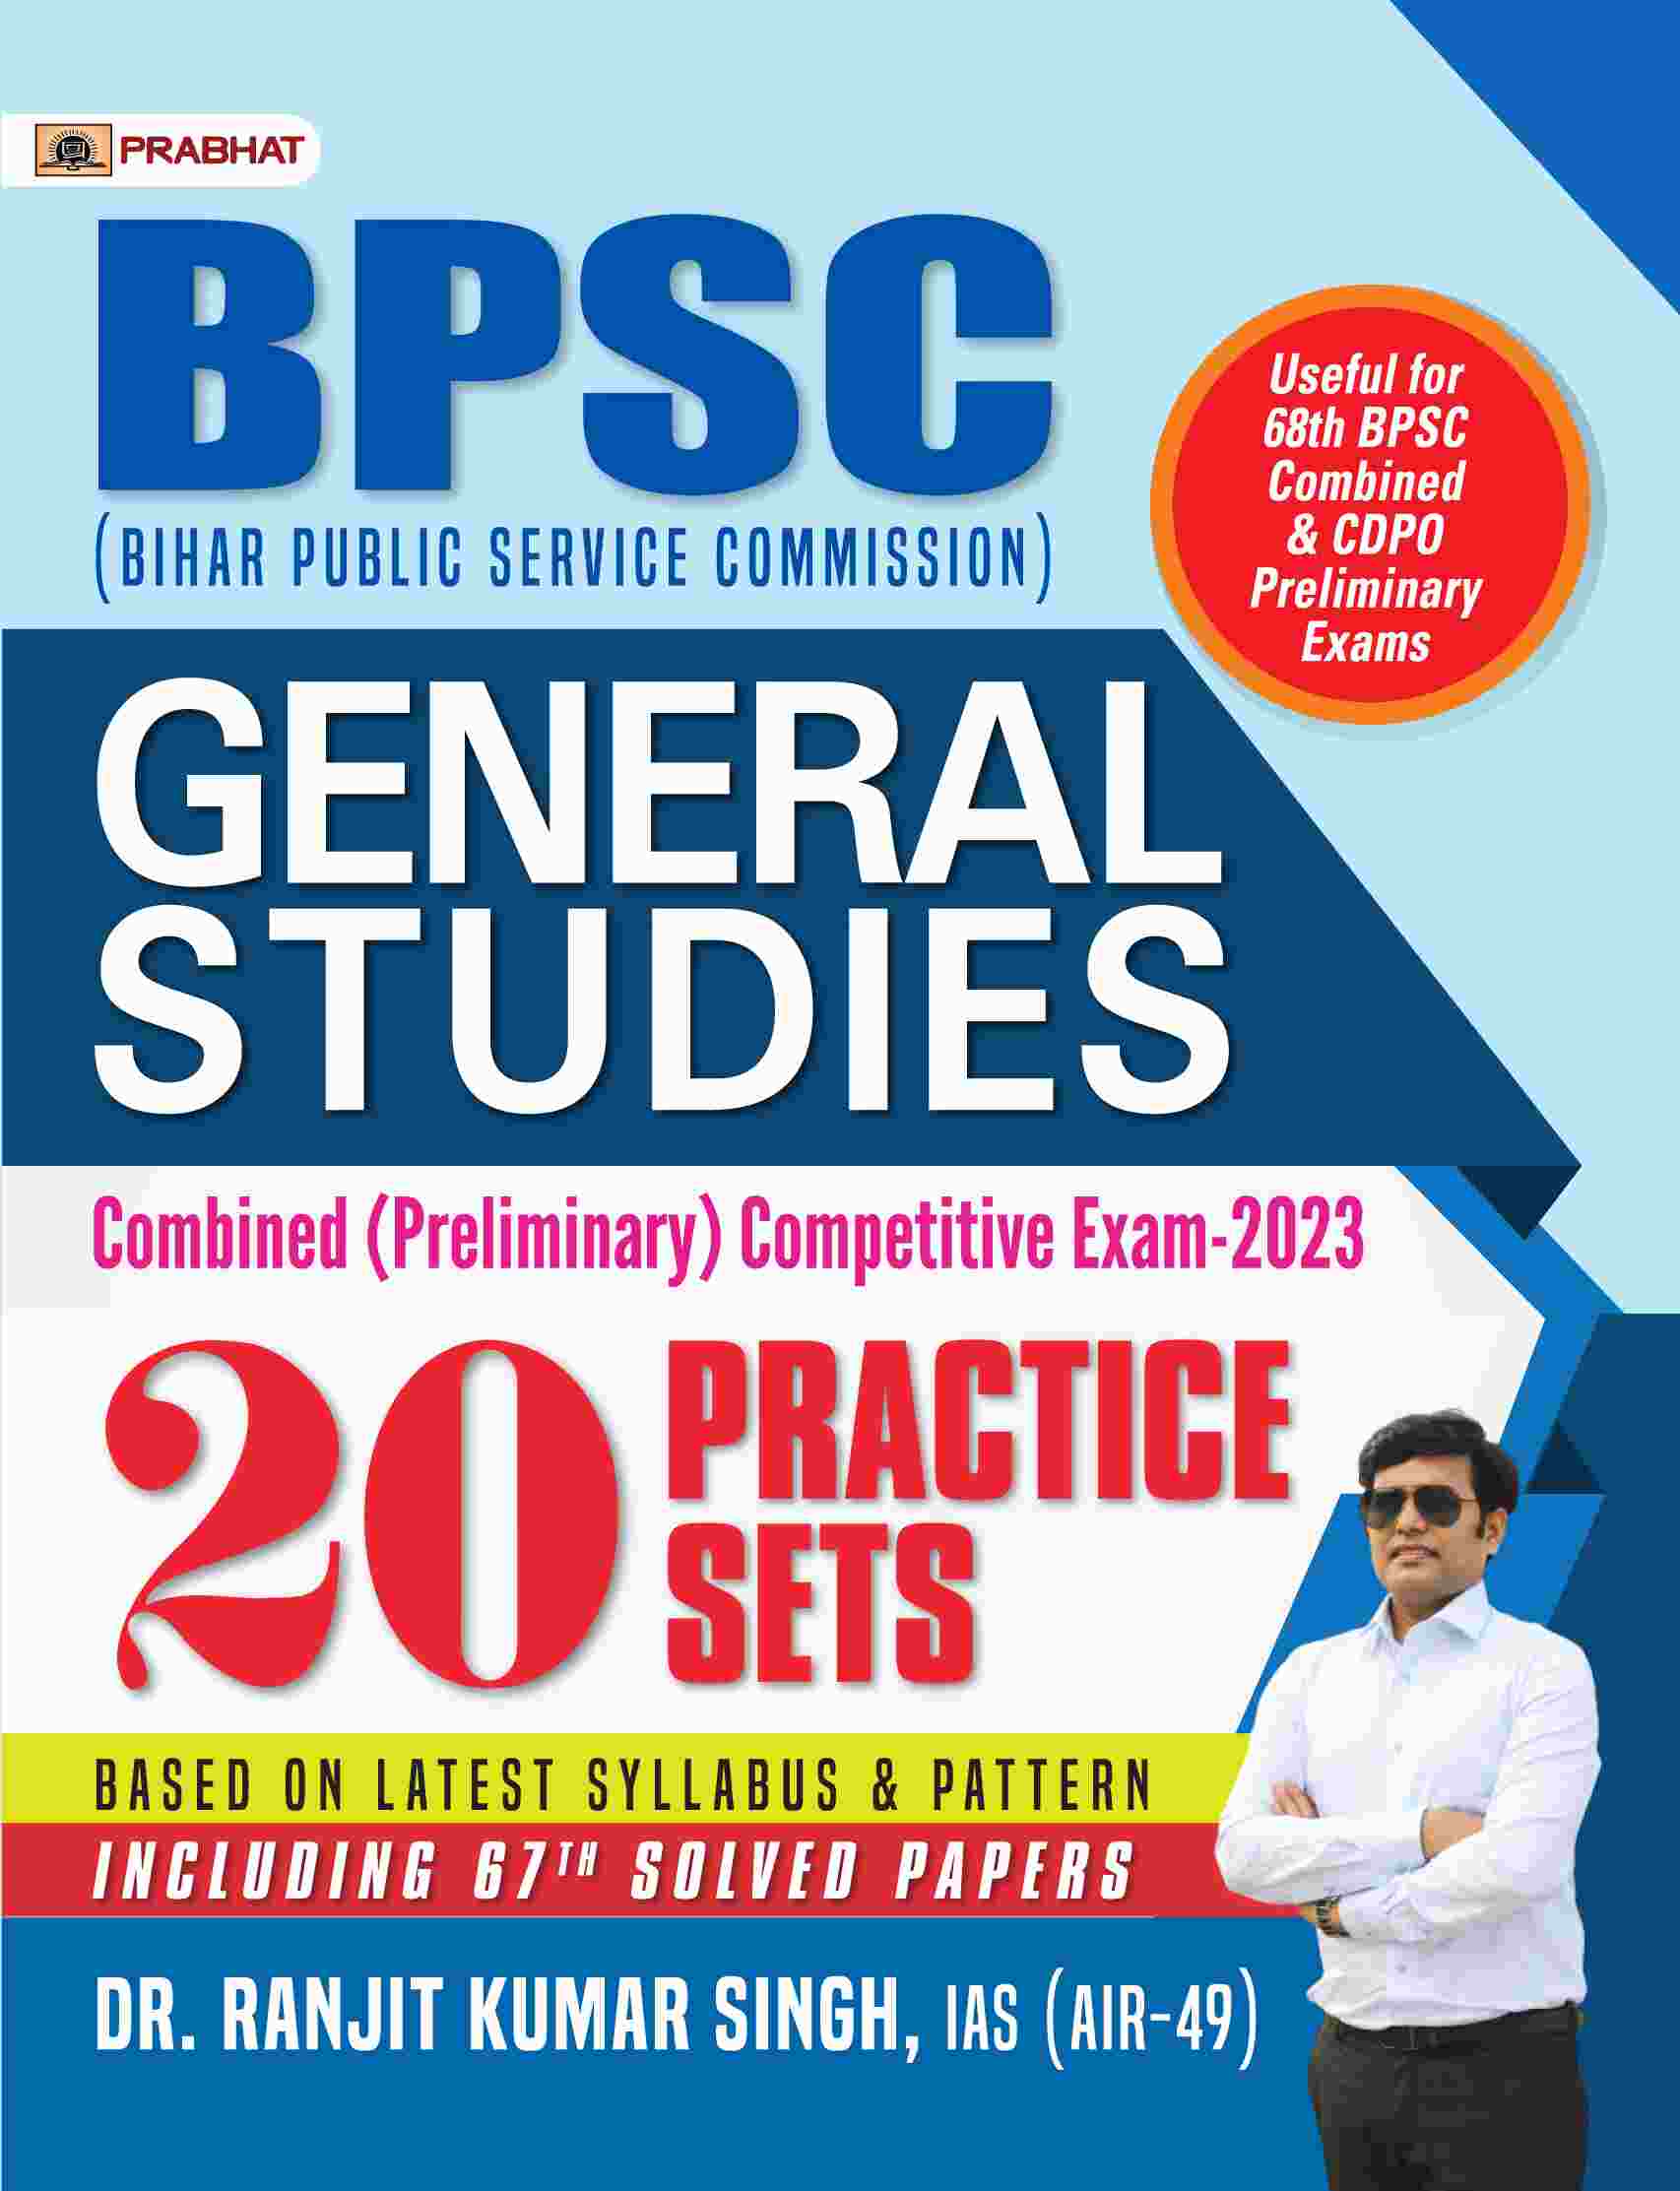 BPSC (Bihar Public Service Commission) General Studies Combined (Preliminary) Competitive Exam-2023 20 Practice Sets